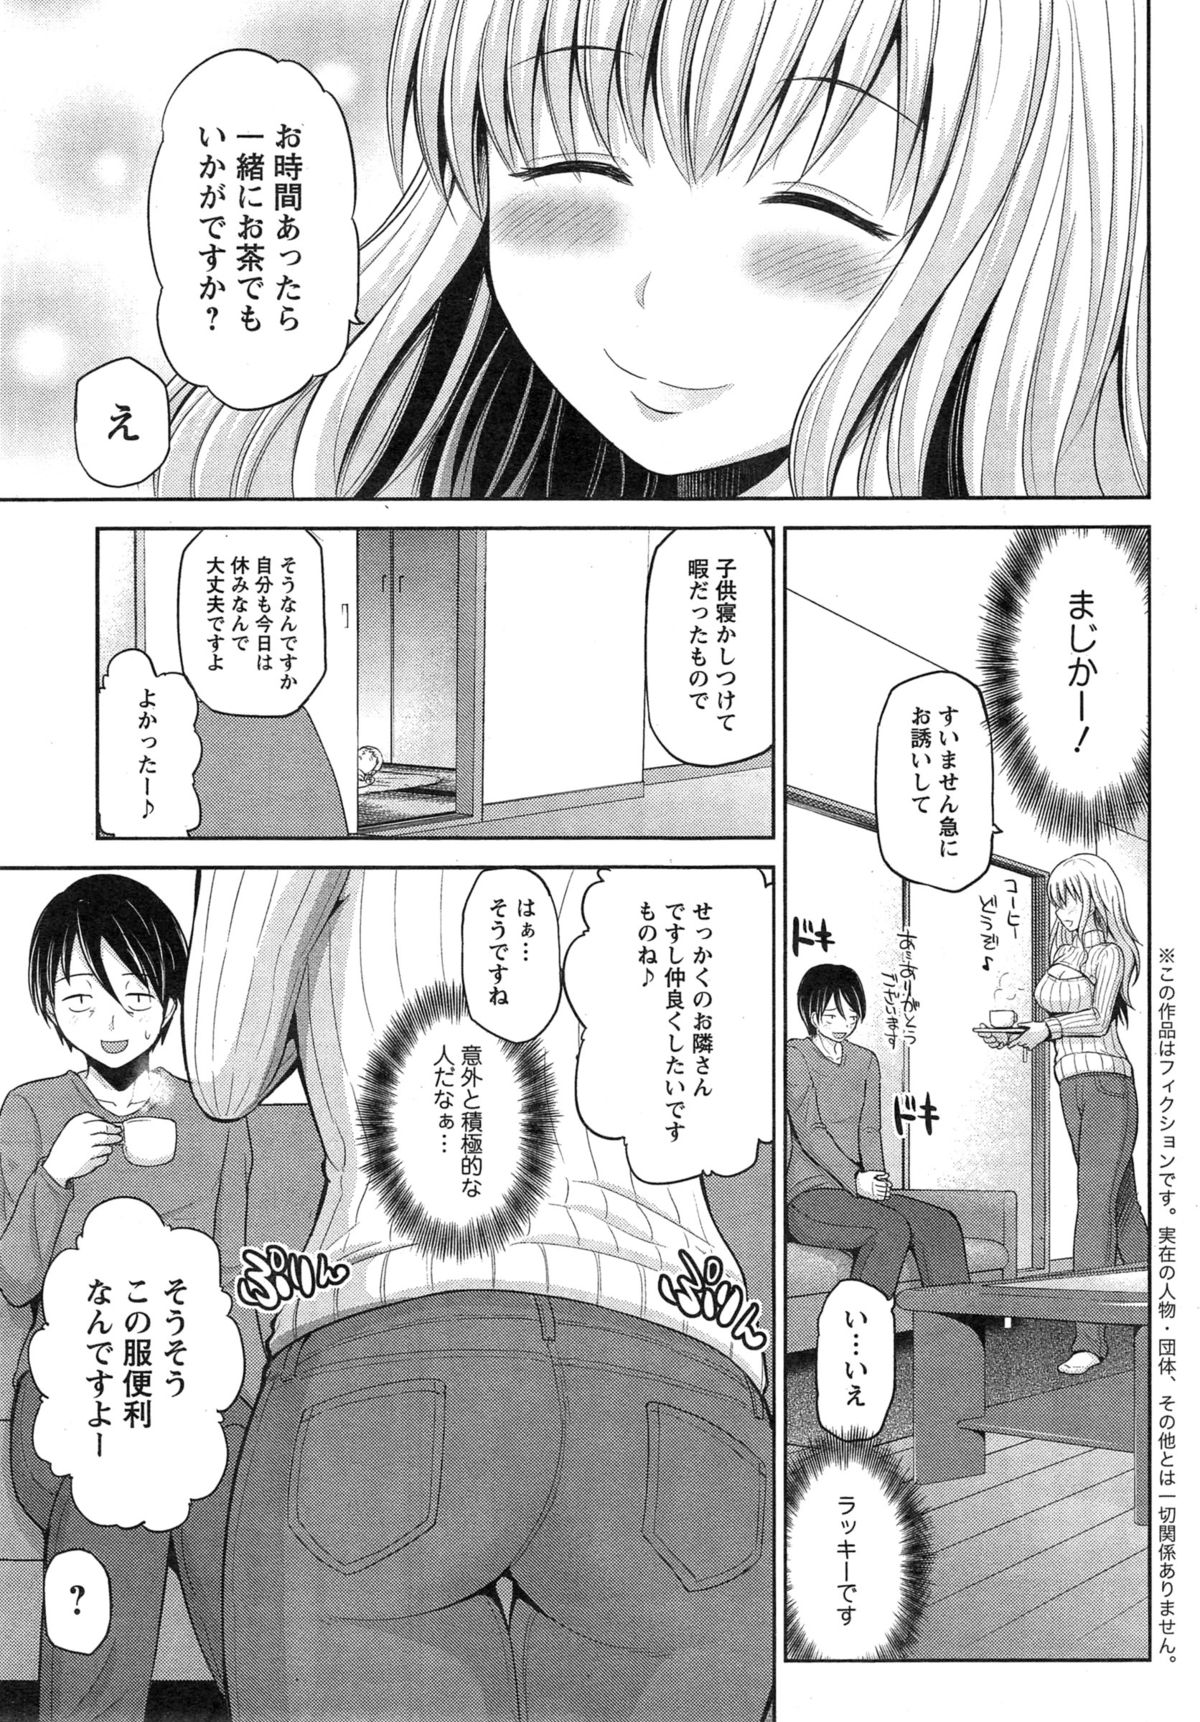 Action Pizazz DX 2015-03 page 27 full